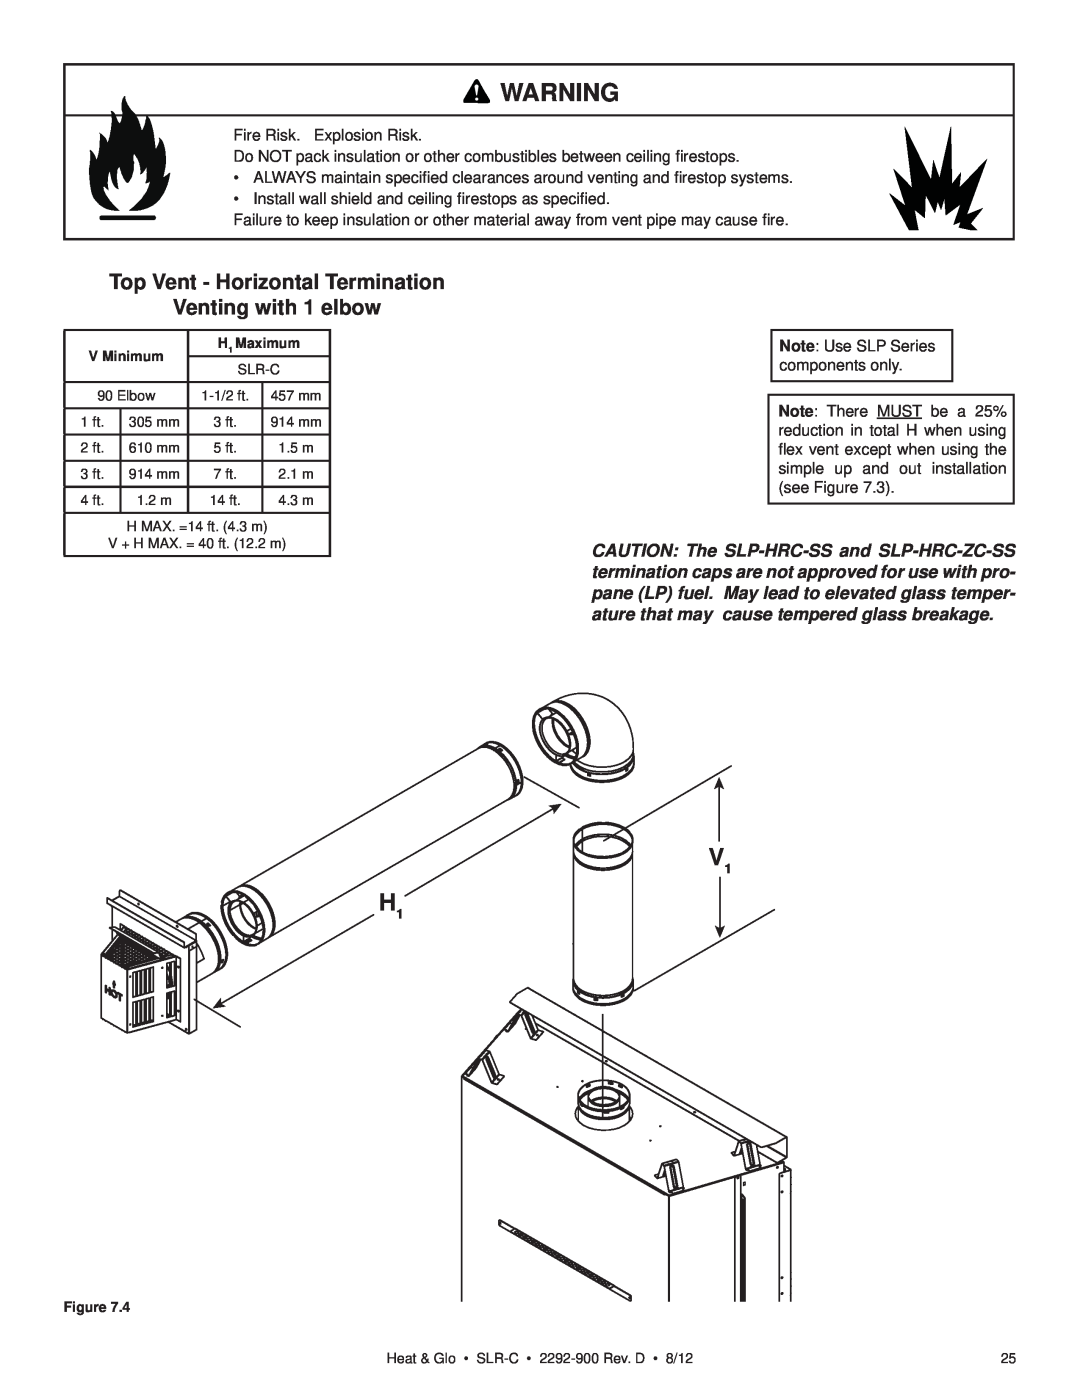 Heat & Glo LifeStyle SLR-C (COSMO) owner manual Top Vent - Horizontal Termination, Venting with 1 elbow 